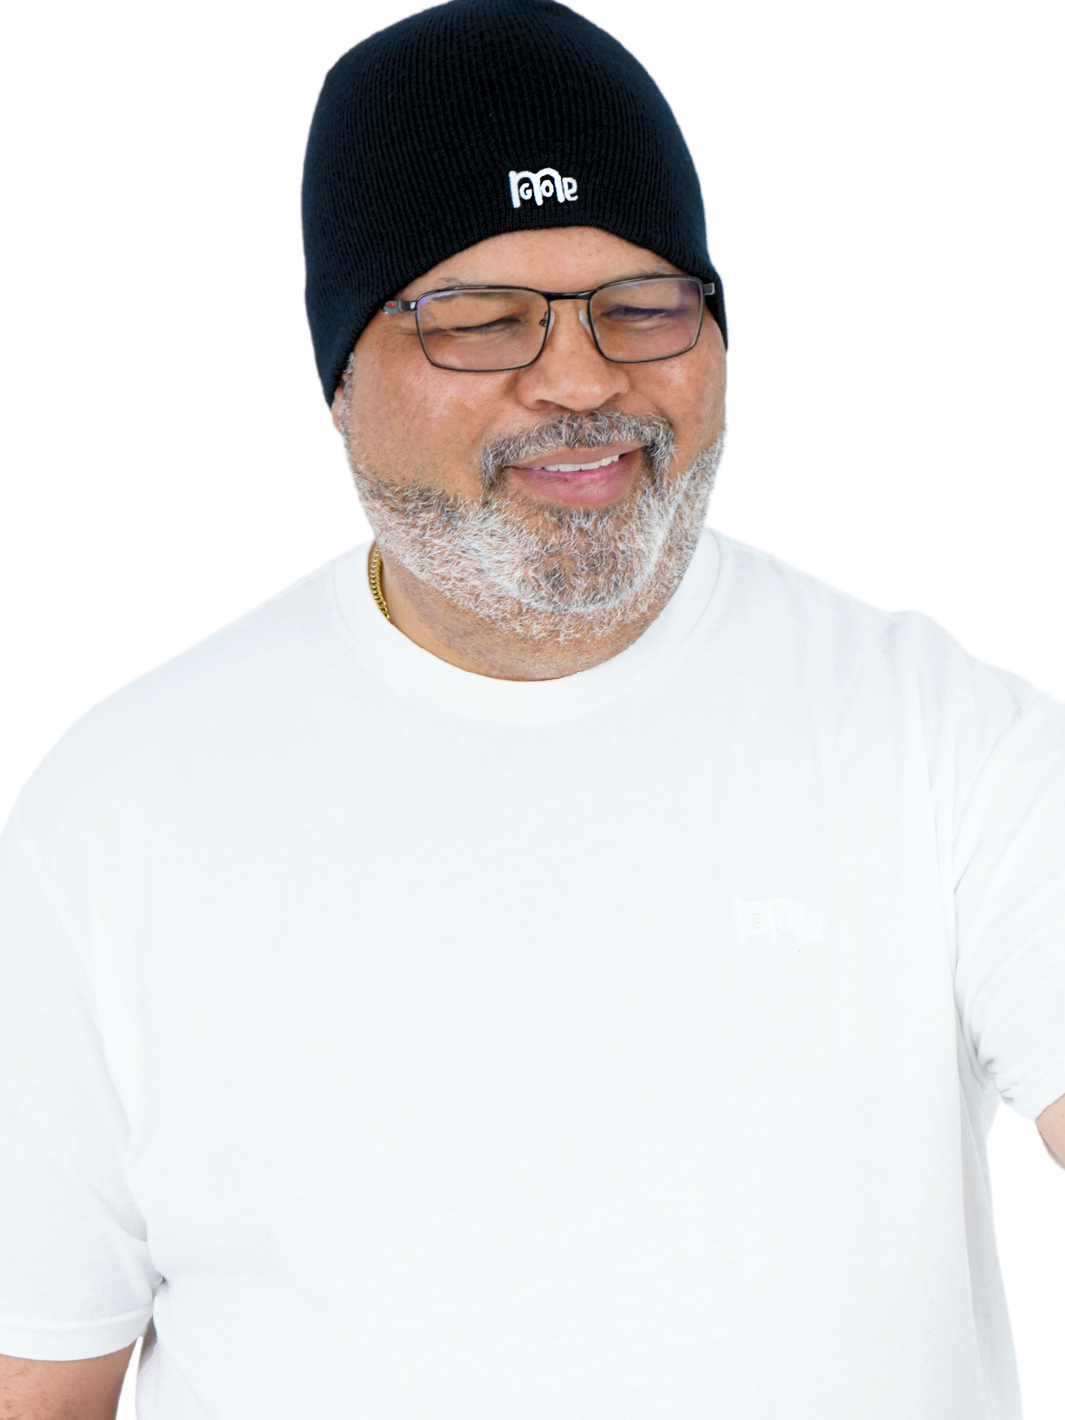 Black Skull Cap Beenie made of 100% silky soft acrylic with White GODinme logo embroidery. 